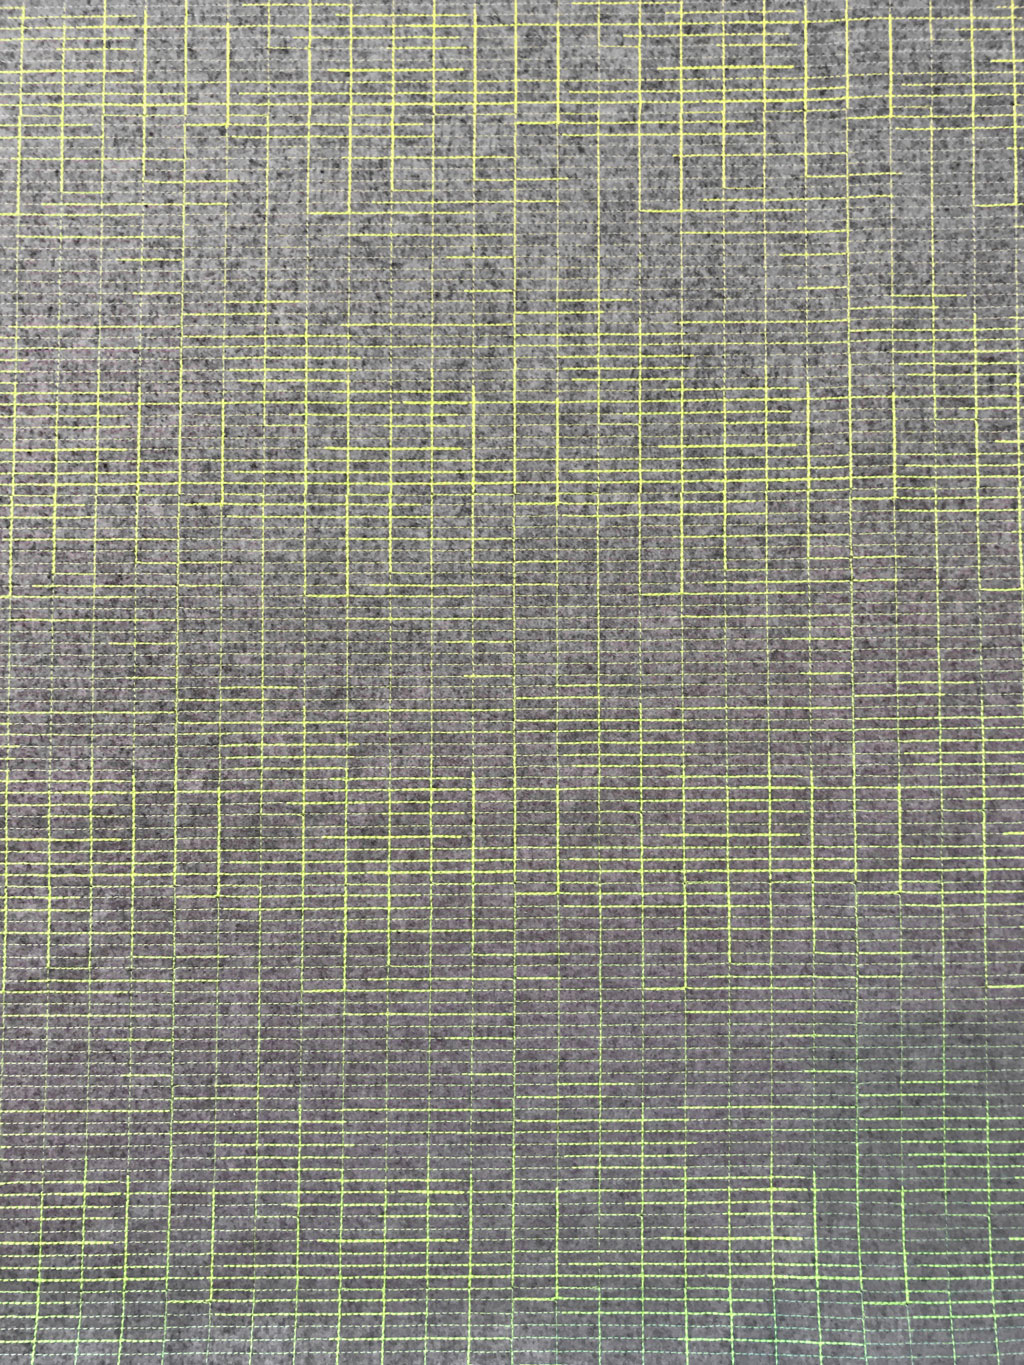 Suzanne Tick, Navigate, 2017. Wool, nylon and polyester. Uploaded ToMaterial Meaning: A Living Legacy of Anni Albers, Craft in America